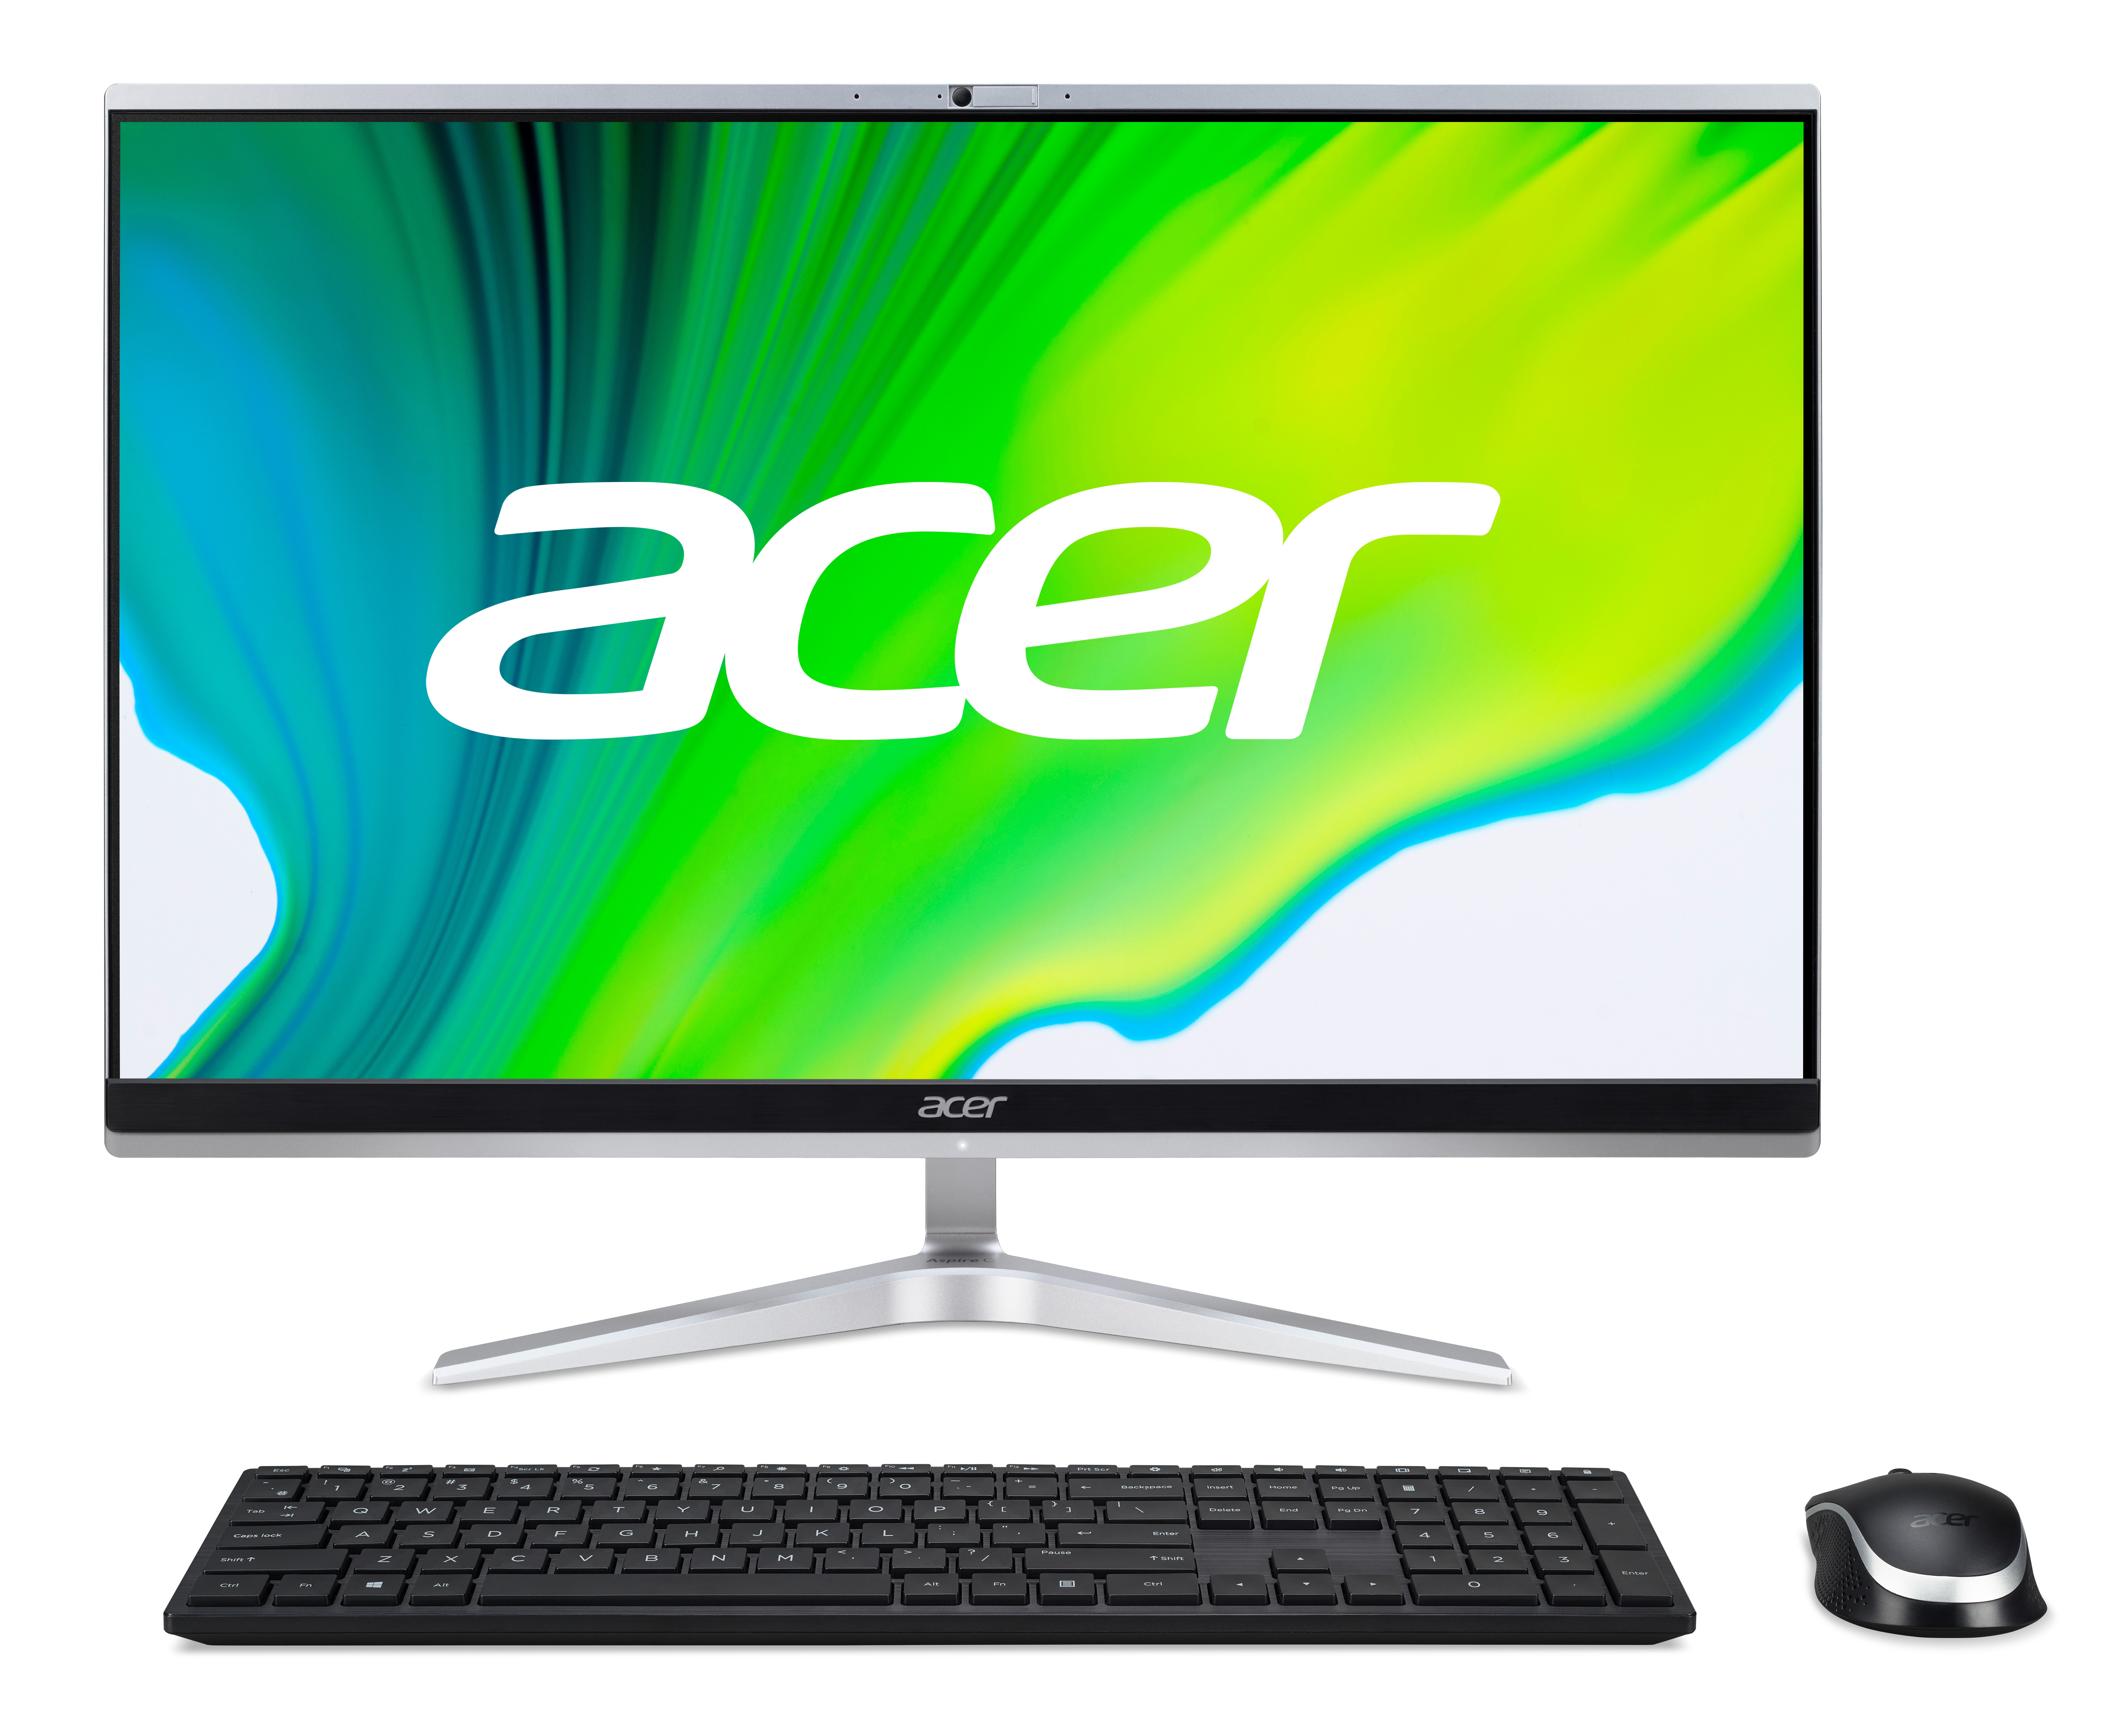 Acer Aspire C24-1650 I56122 NL All-in-one PC